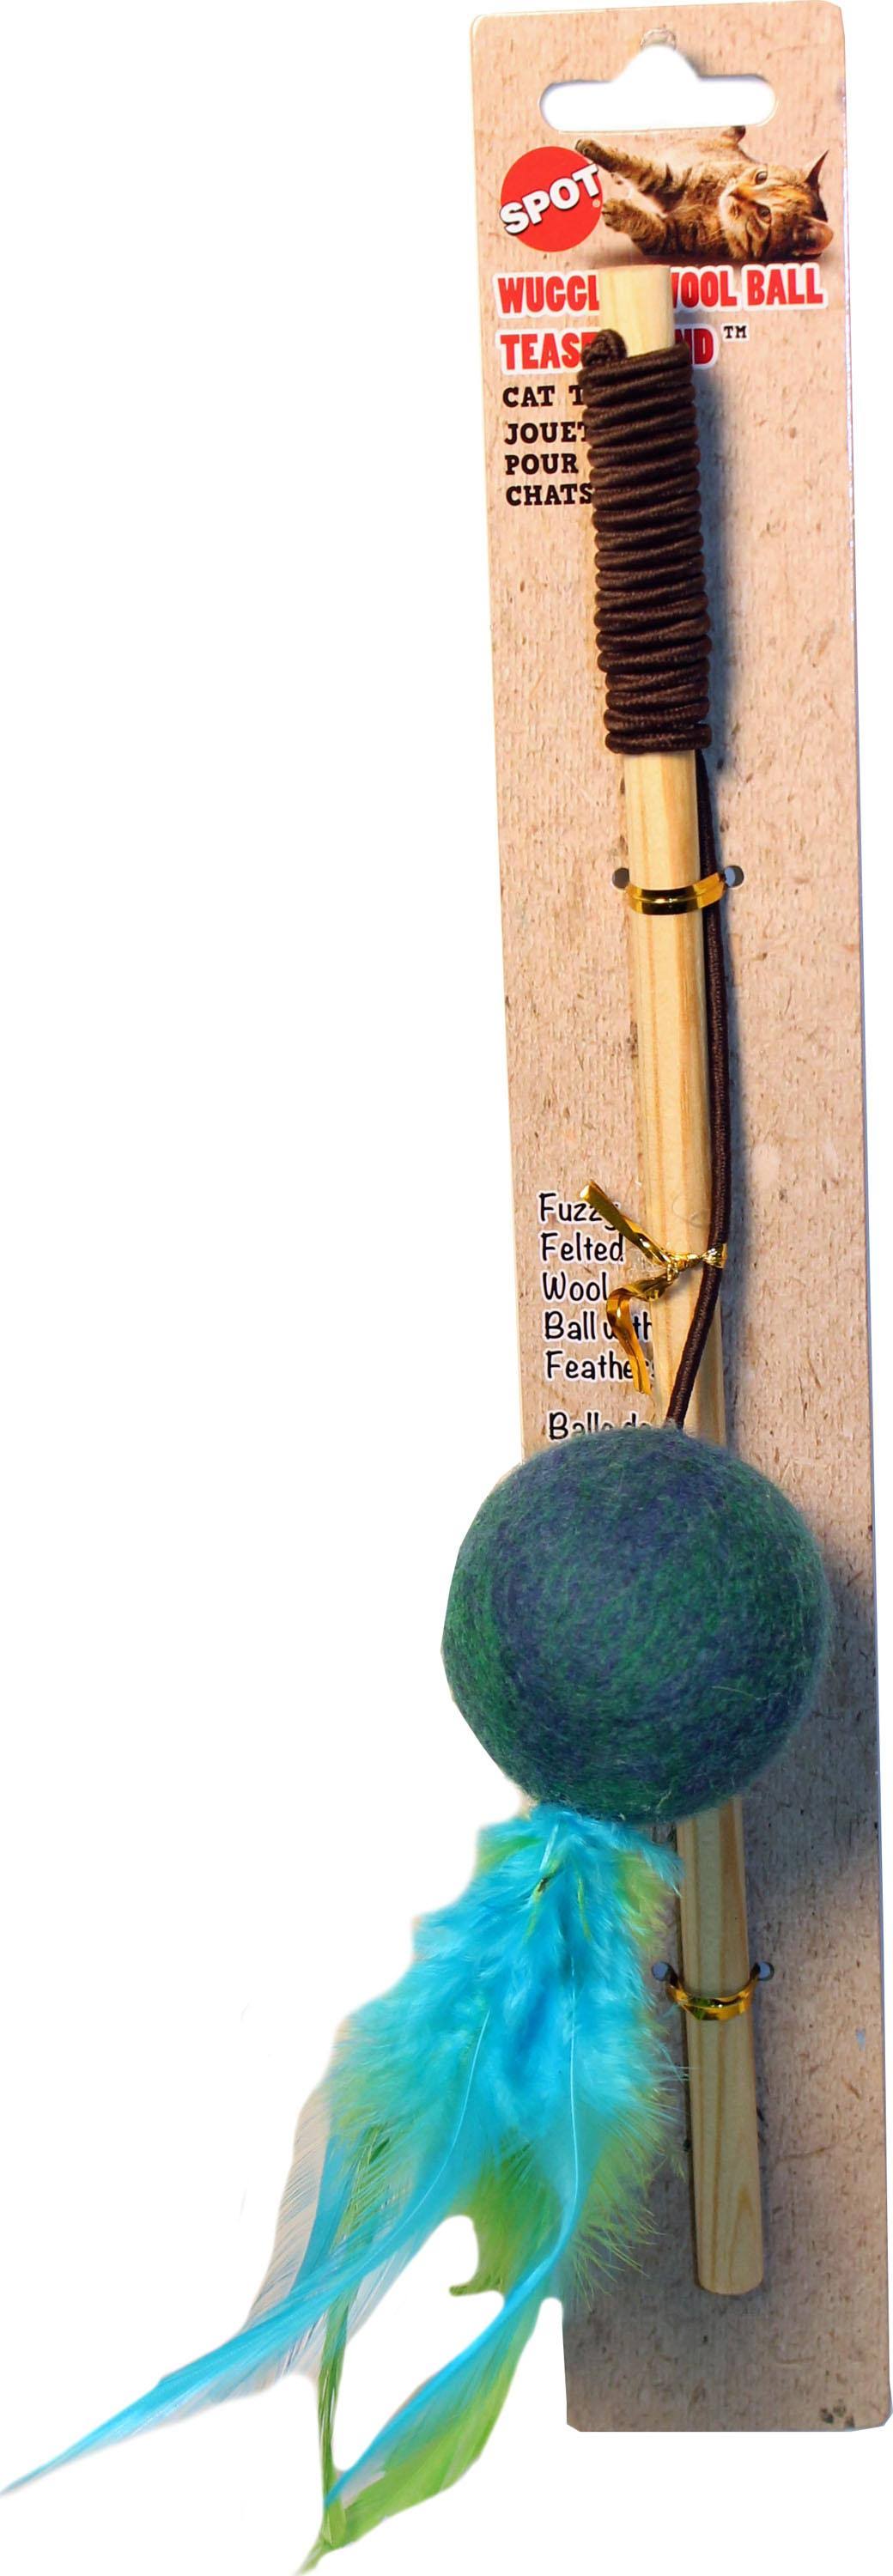 Ethical Pets Wool Ball Teaser Wand Wuggles Cat Toy